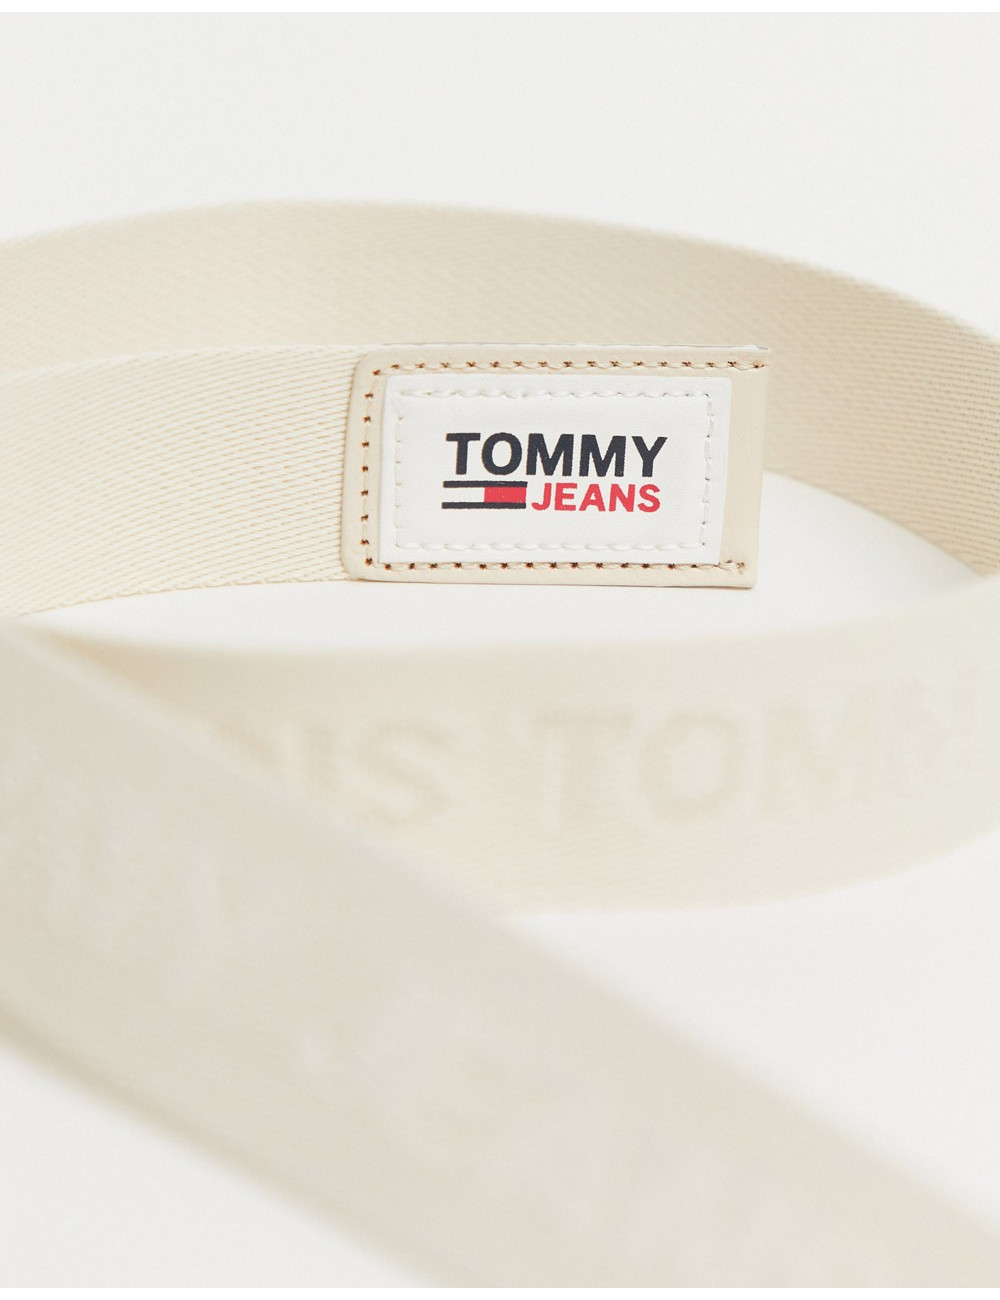 Tommy Jeans d-ring logo...